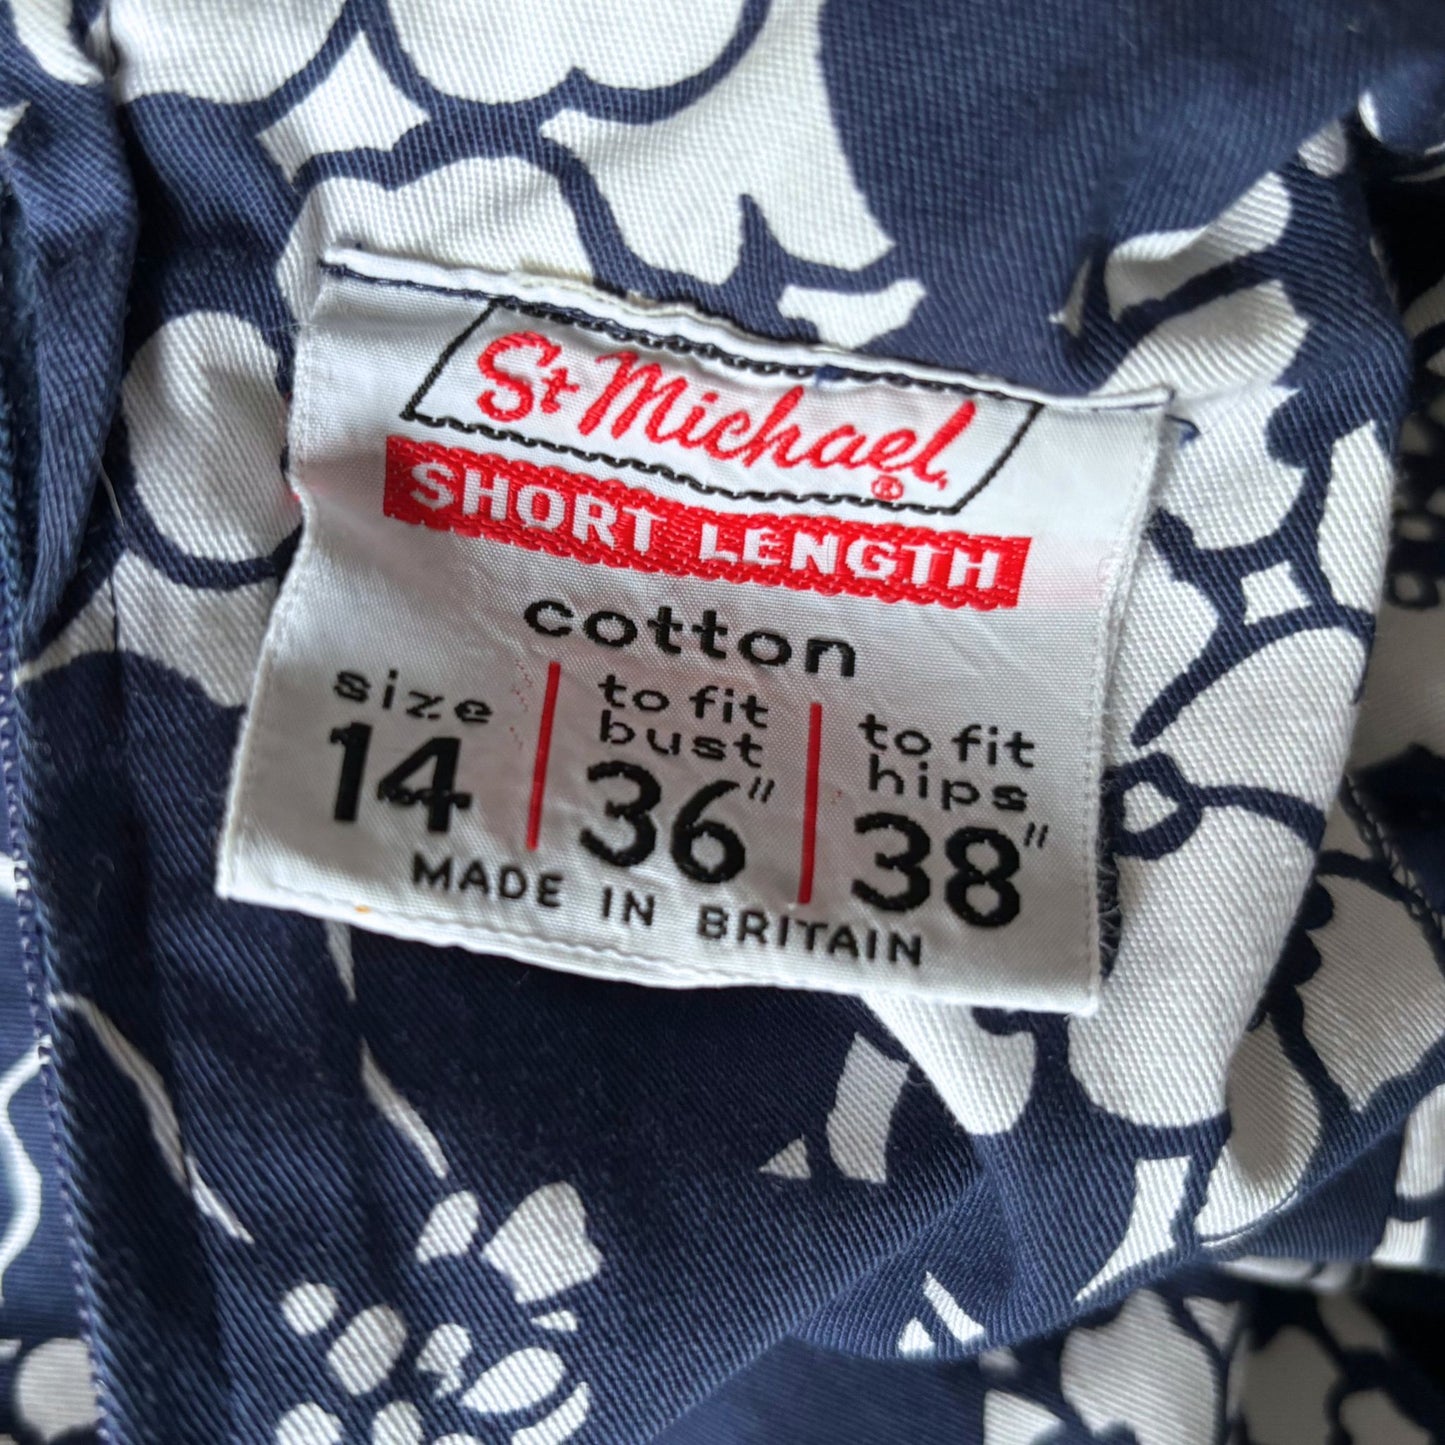 Navy Blue and White Floral Cotton 60s Mini Dress by St. Michael. Approx UK size  10- 12